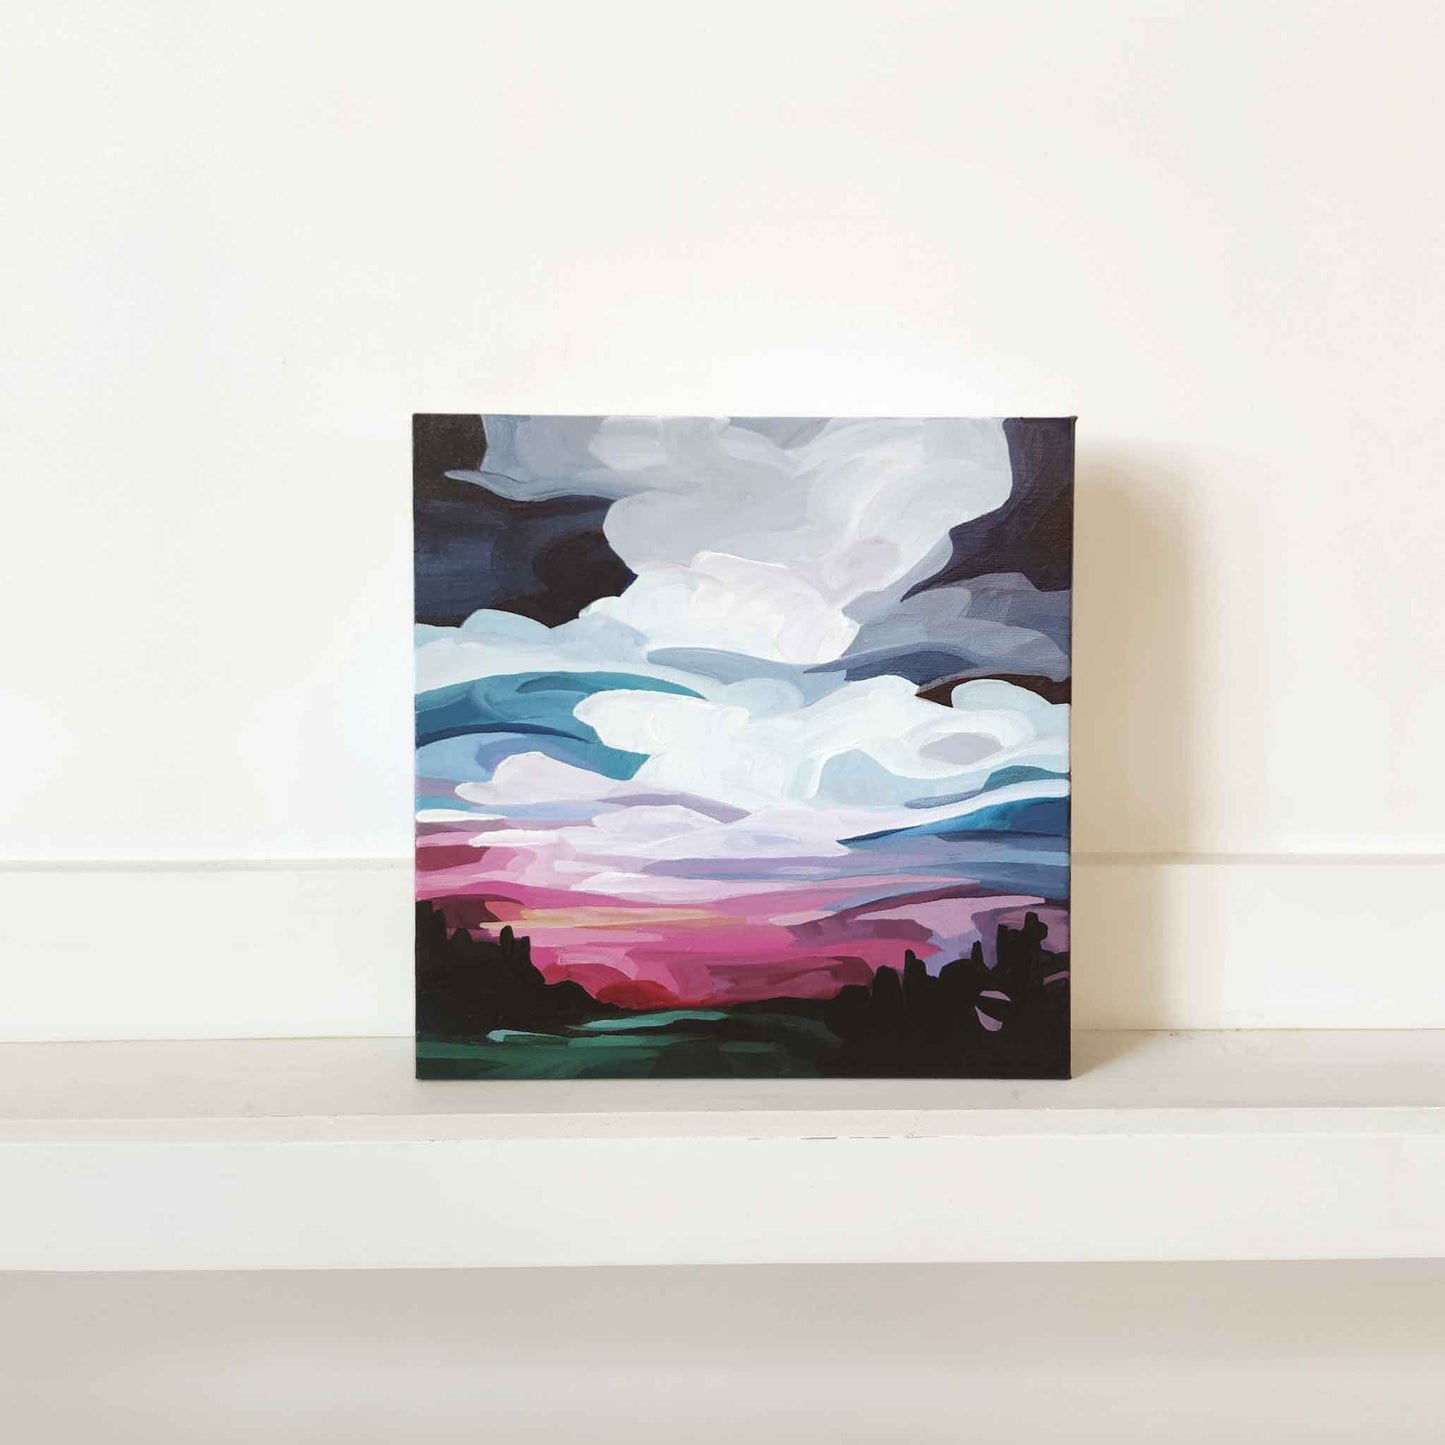 abstract landscape painting under a dramatic night sky with the remants of a sunset on the horizon